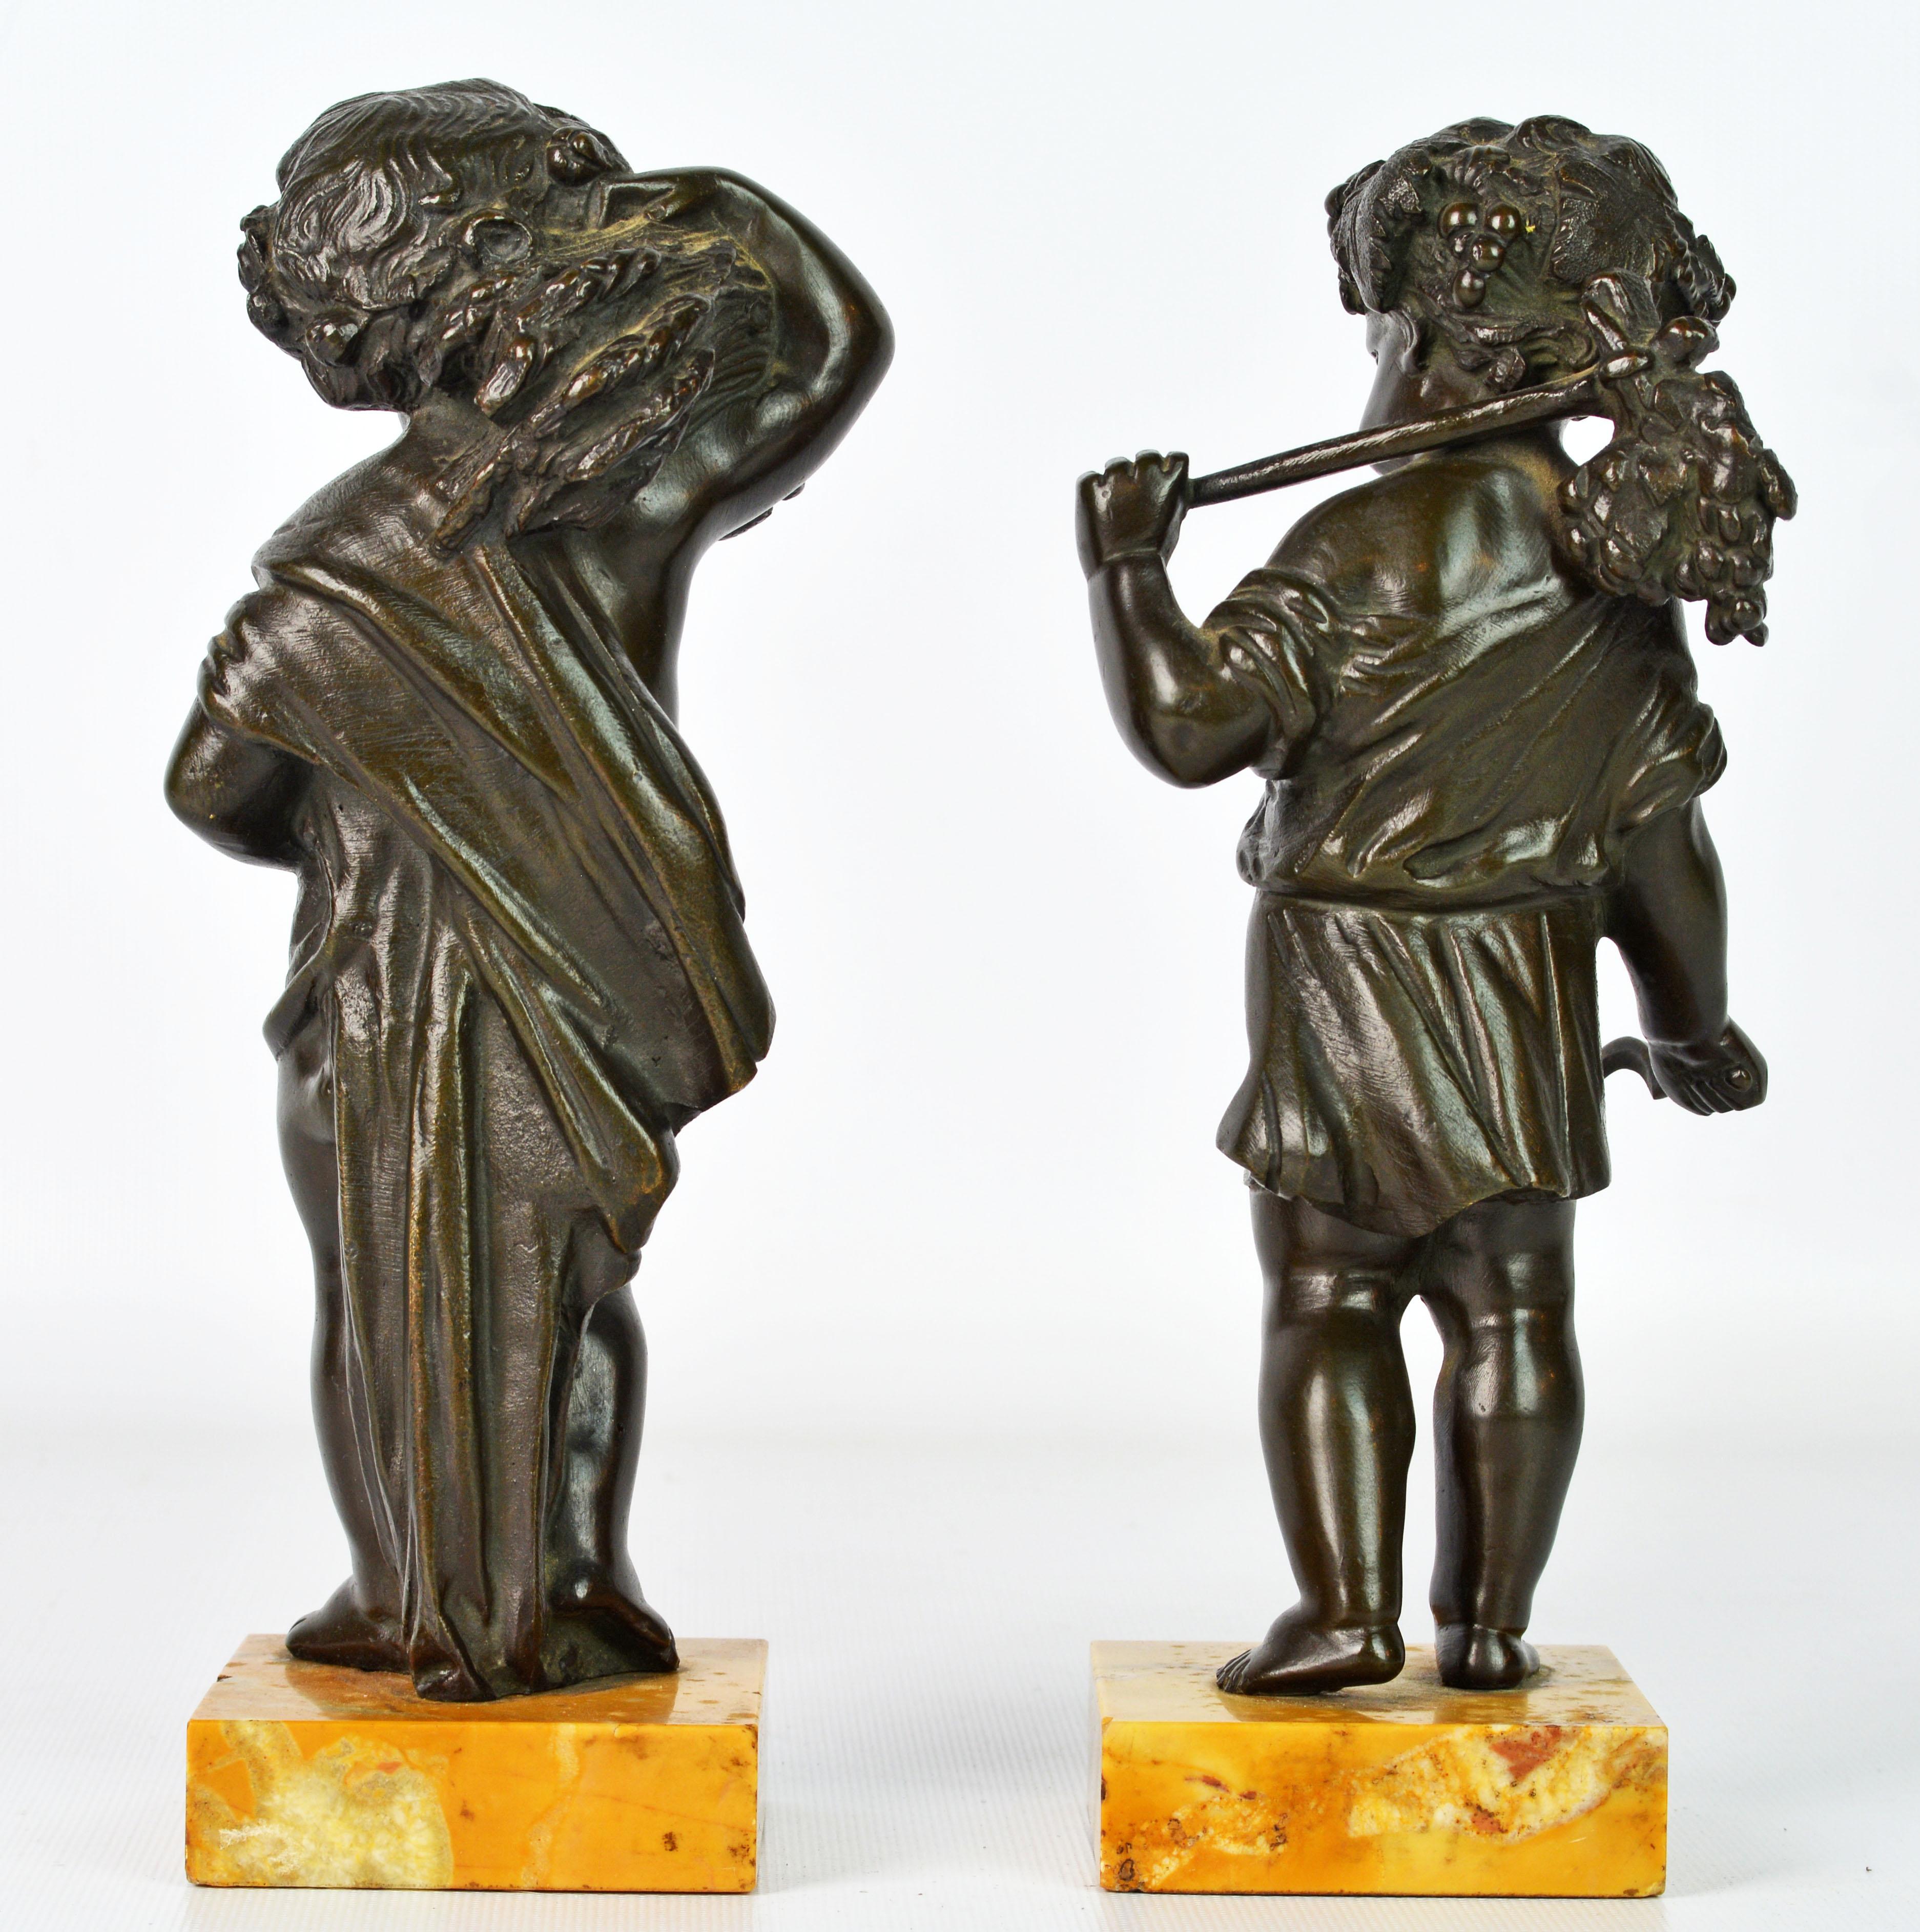 Italian Pair of 19th Century Patinated Bronze Putti as Harvesters on Sienna Marble Bases